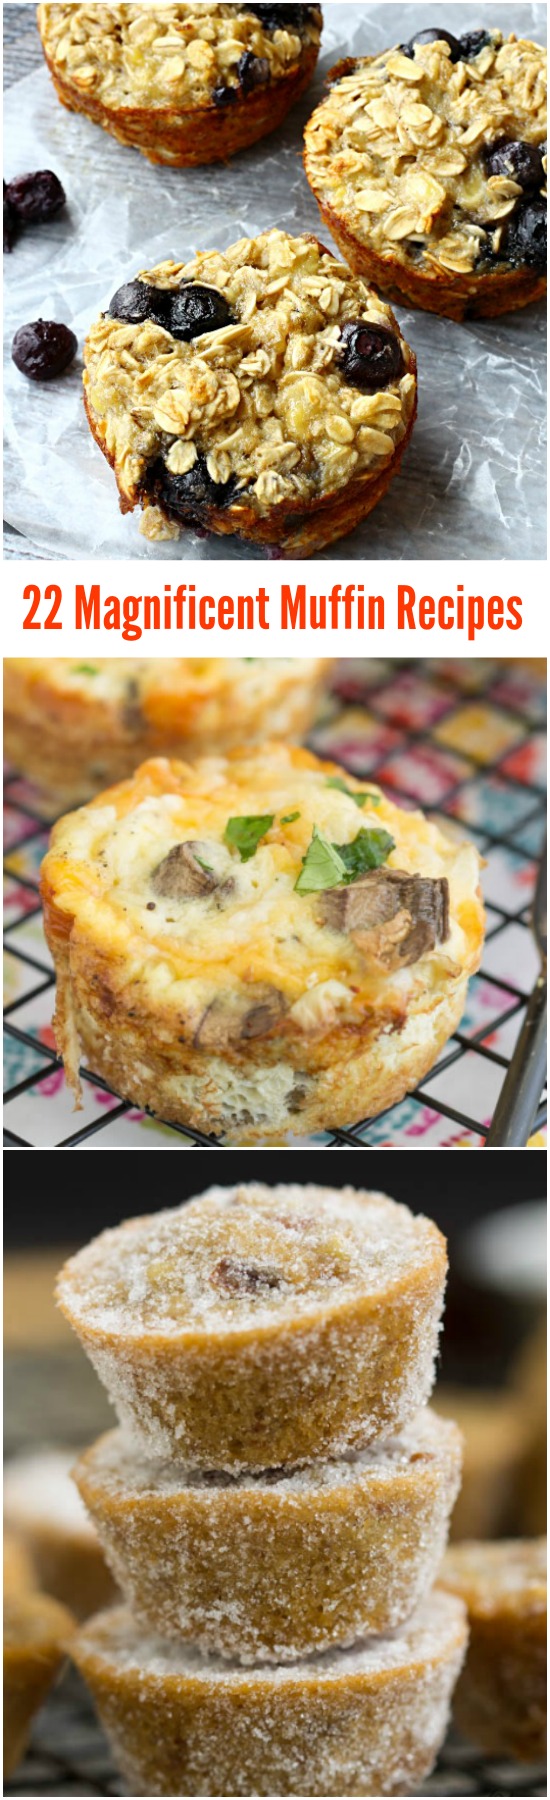 Mix up your morning with a hot, fresh breakfast and my 22 Truly Magnificent Muffin Recipes.